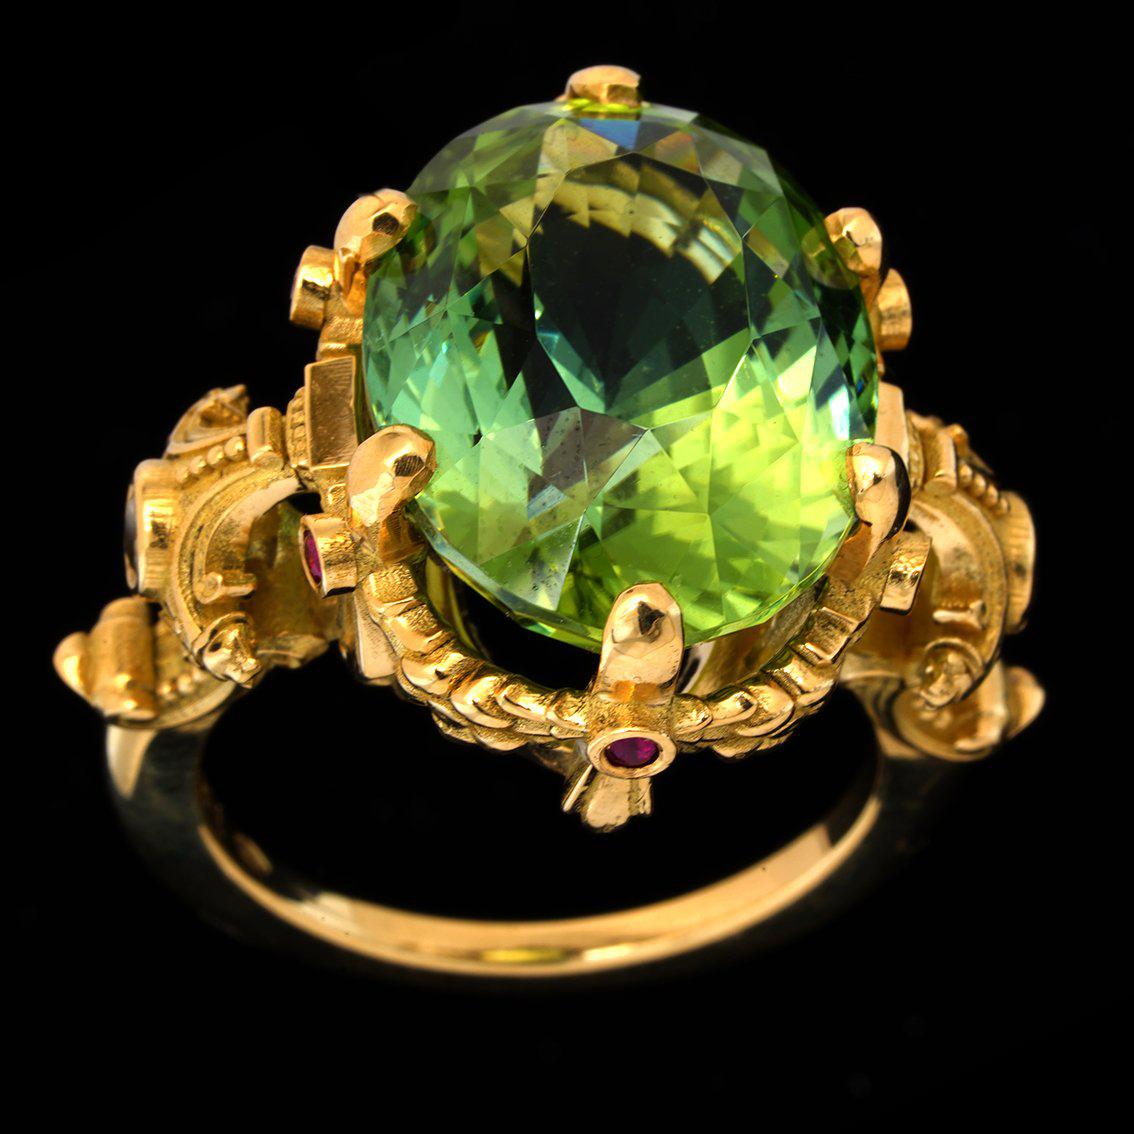 21ct Green Tourmaline, Rubies, Diamonds, & 18k Yellow Gold Antique Style Ring For Sale 8